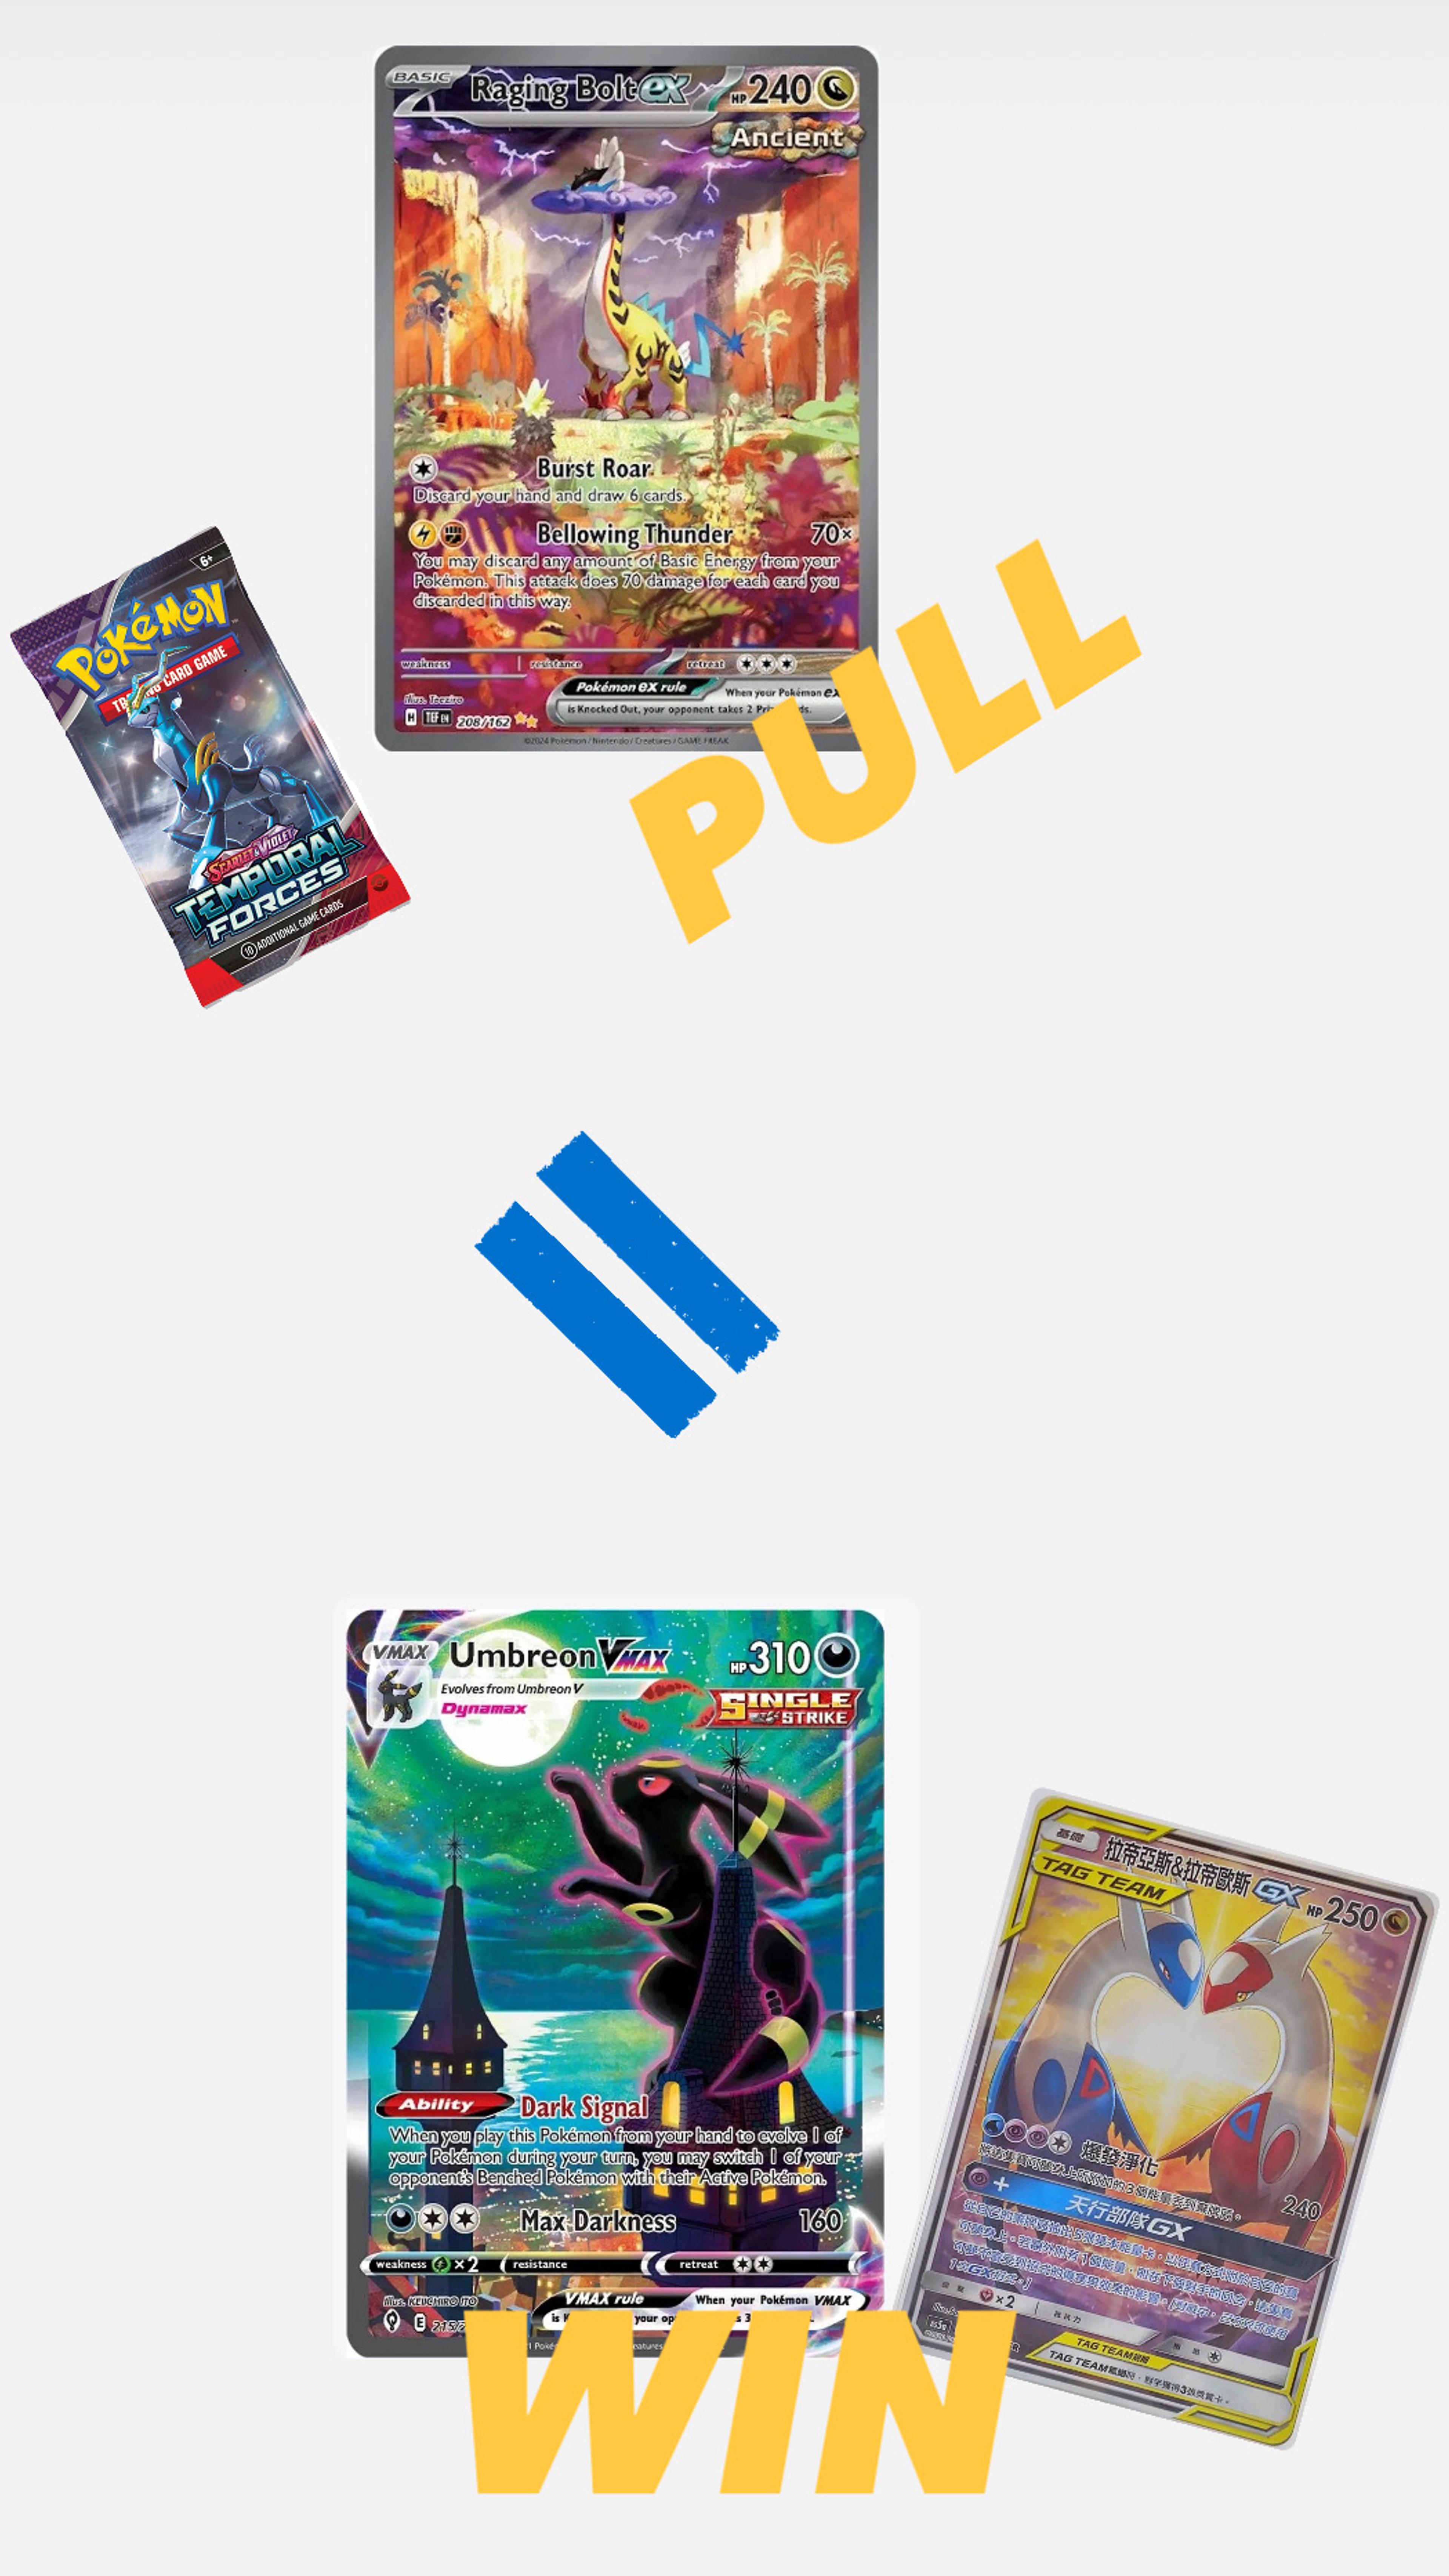 Preview image for the show titled "Craftii: WIN UMBREON VMAX ALT! TCG & MORE!" at May 6, 2024